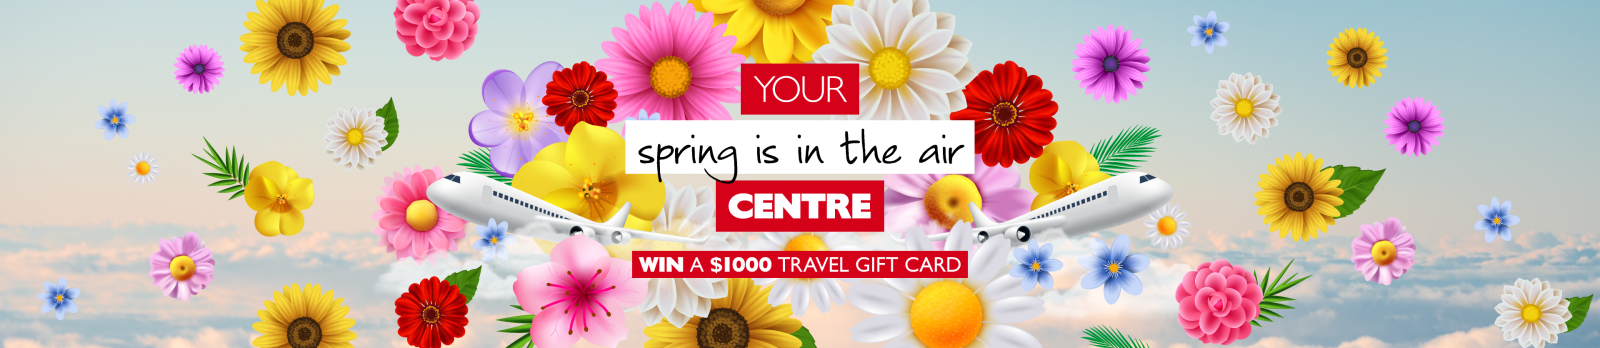 Your Spring is in the air centre | Win a $1,000* travel gift card. A cartoon image of planes and colourful flowers